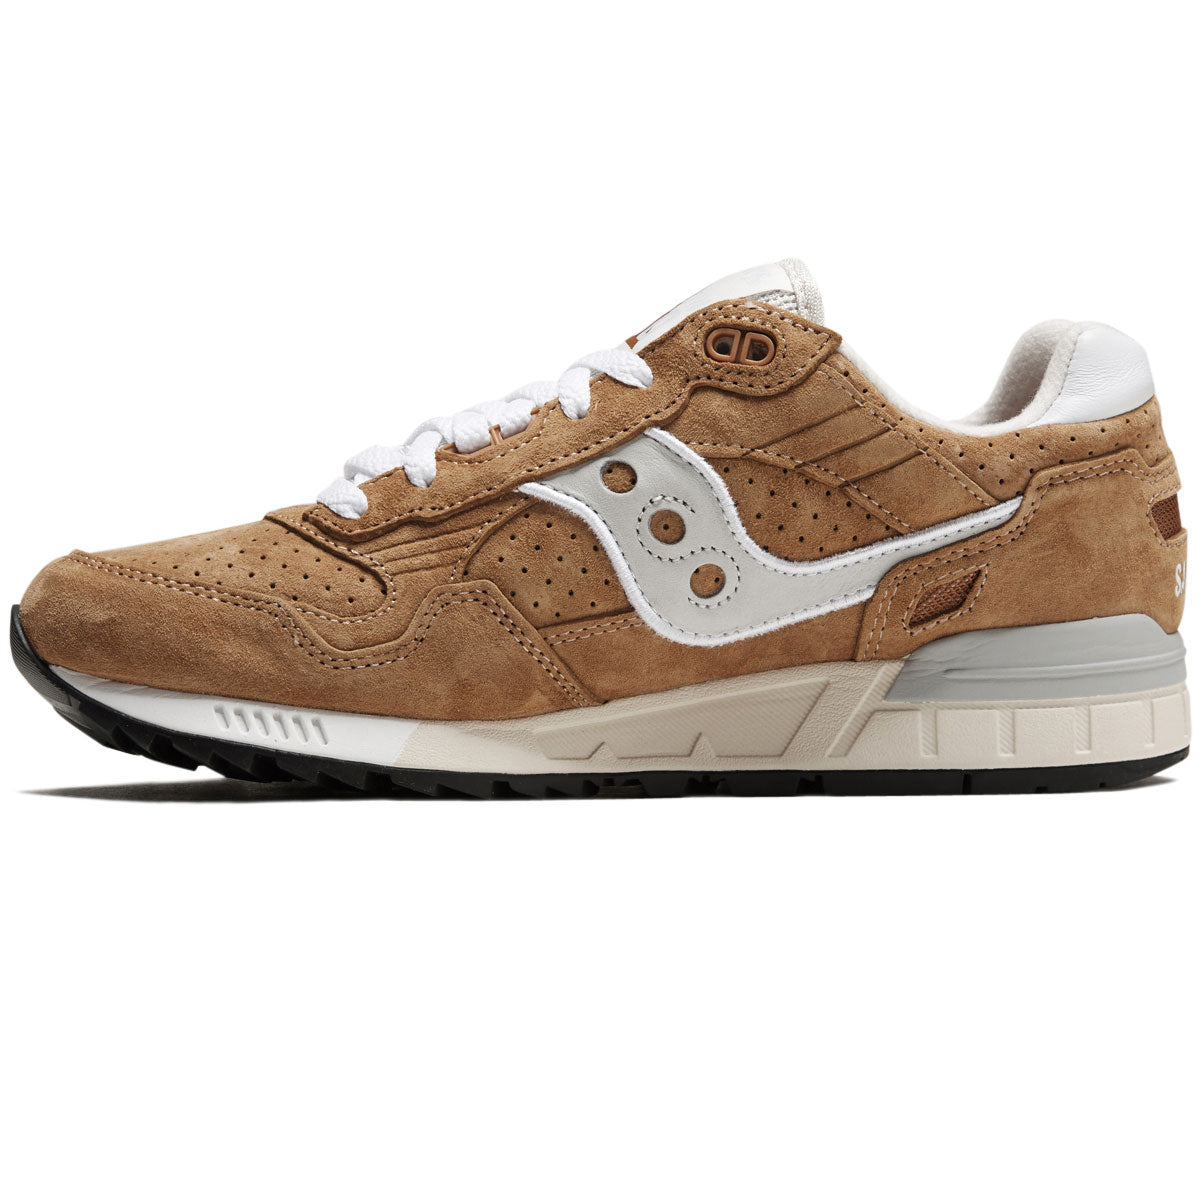 Saucony Shadow 5000 Shoes - Rust image 2